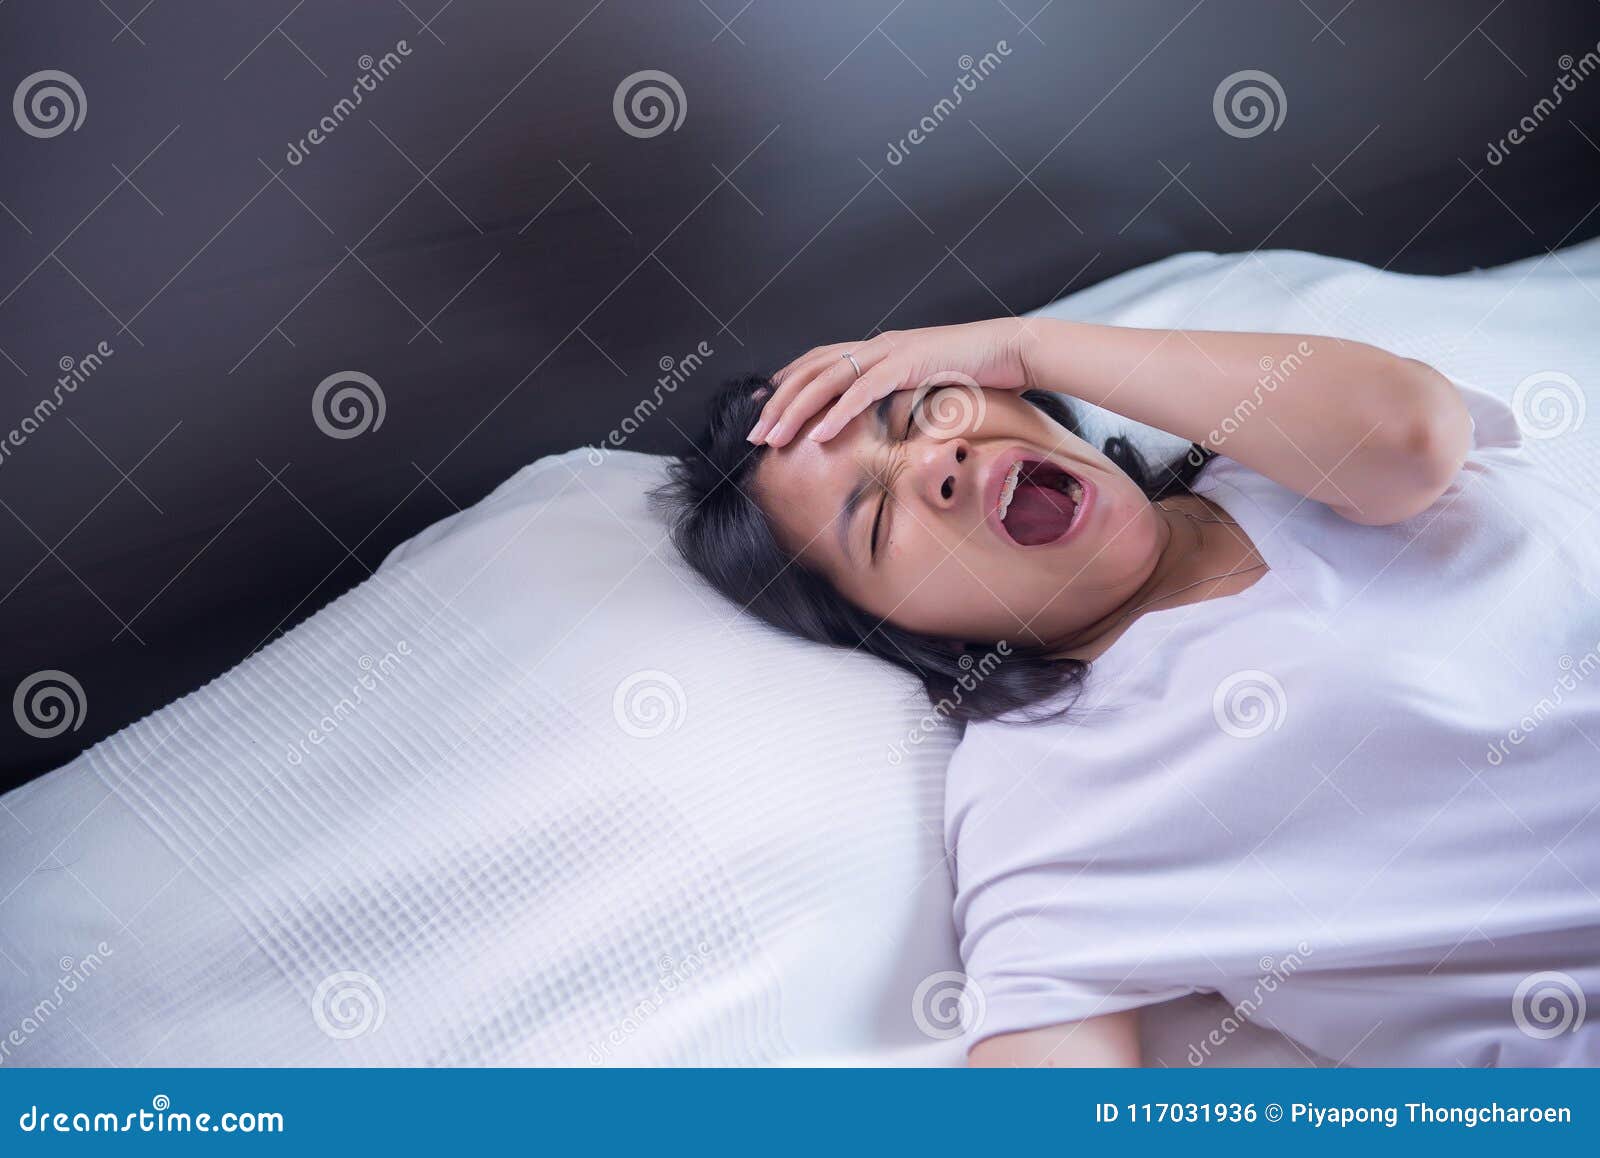 asian girl yawning on her bed and tired sleepy,symptoms and sleepiness